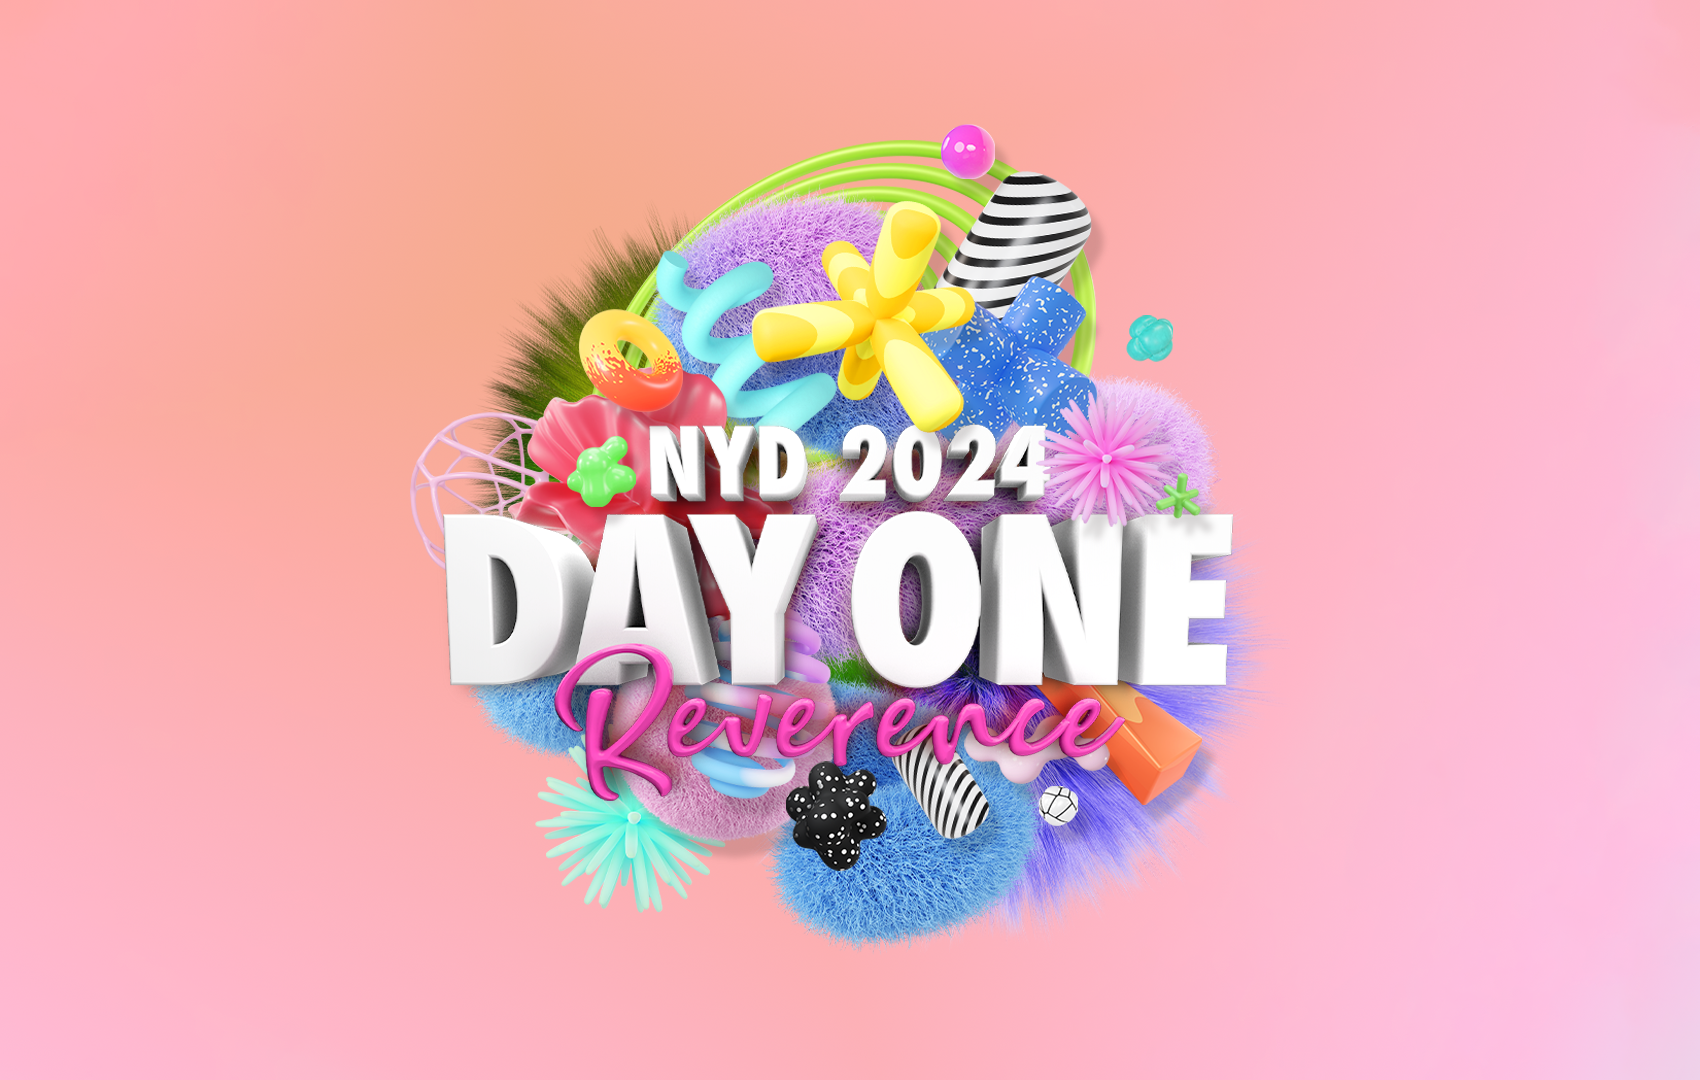 Basement Jaxx, Faithless, and More: NYD 2024 'Day One' Reverence Lineup Released Banner